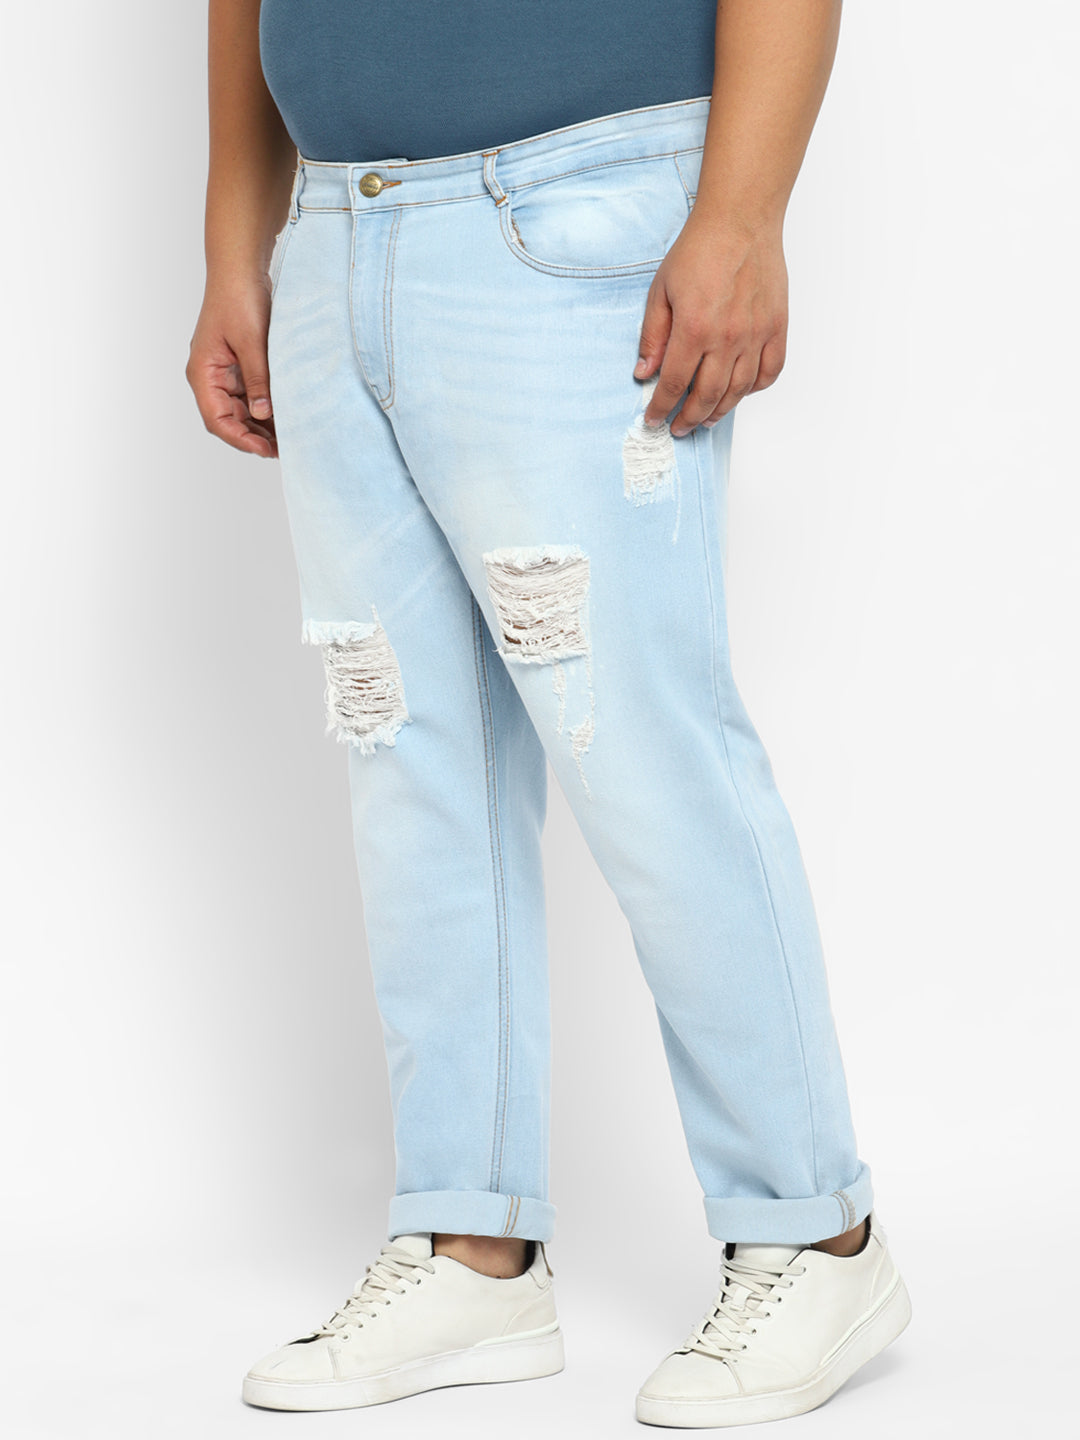 Men's Ice Blue Regular Fit Heavy Distressed/Torn Jeans